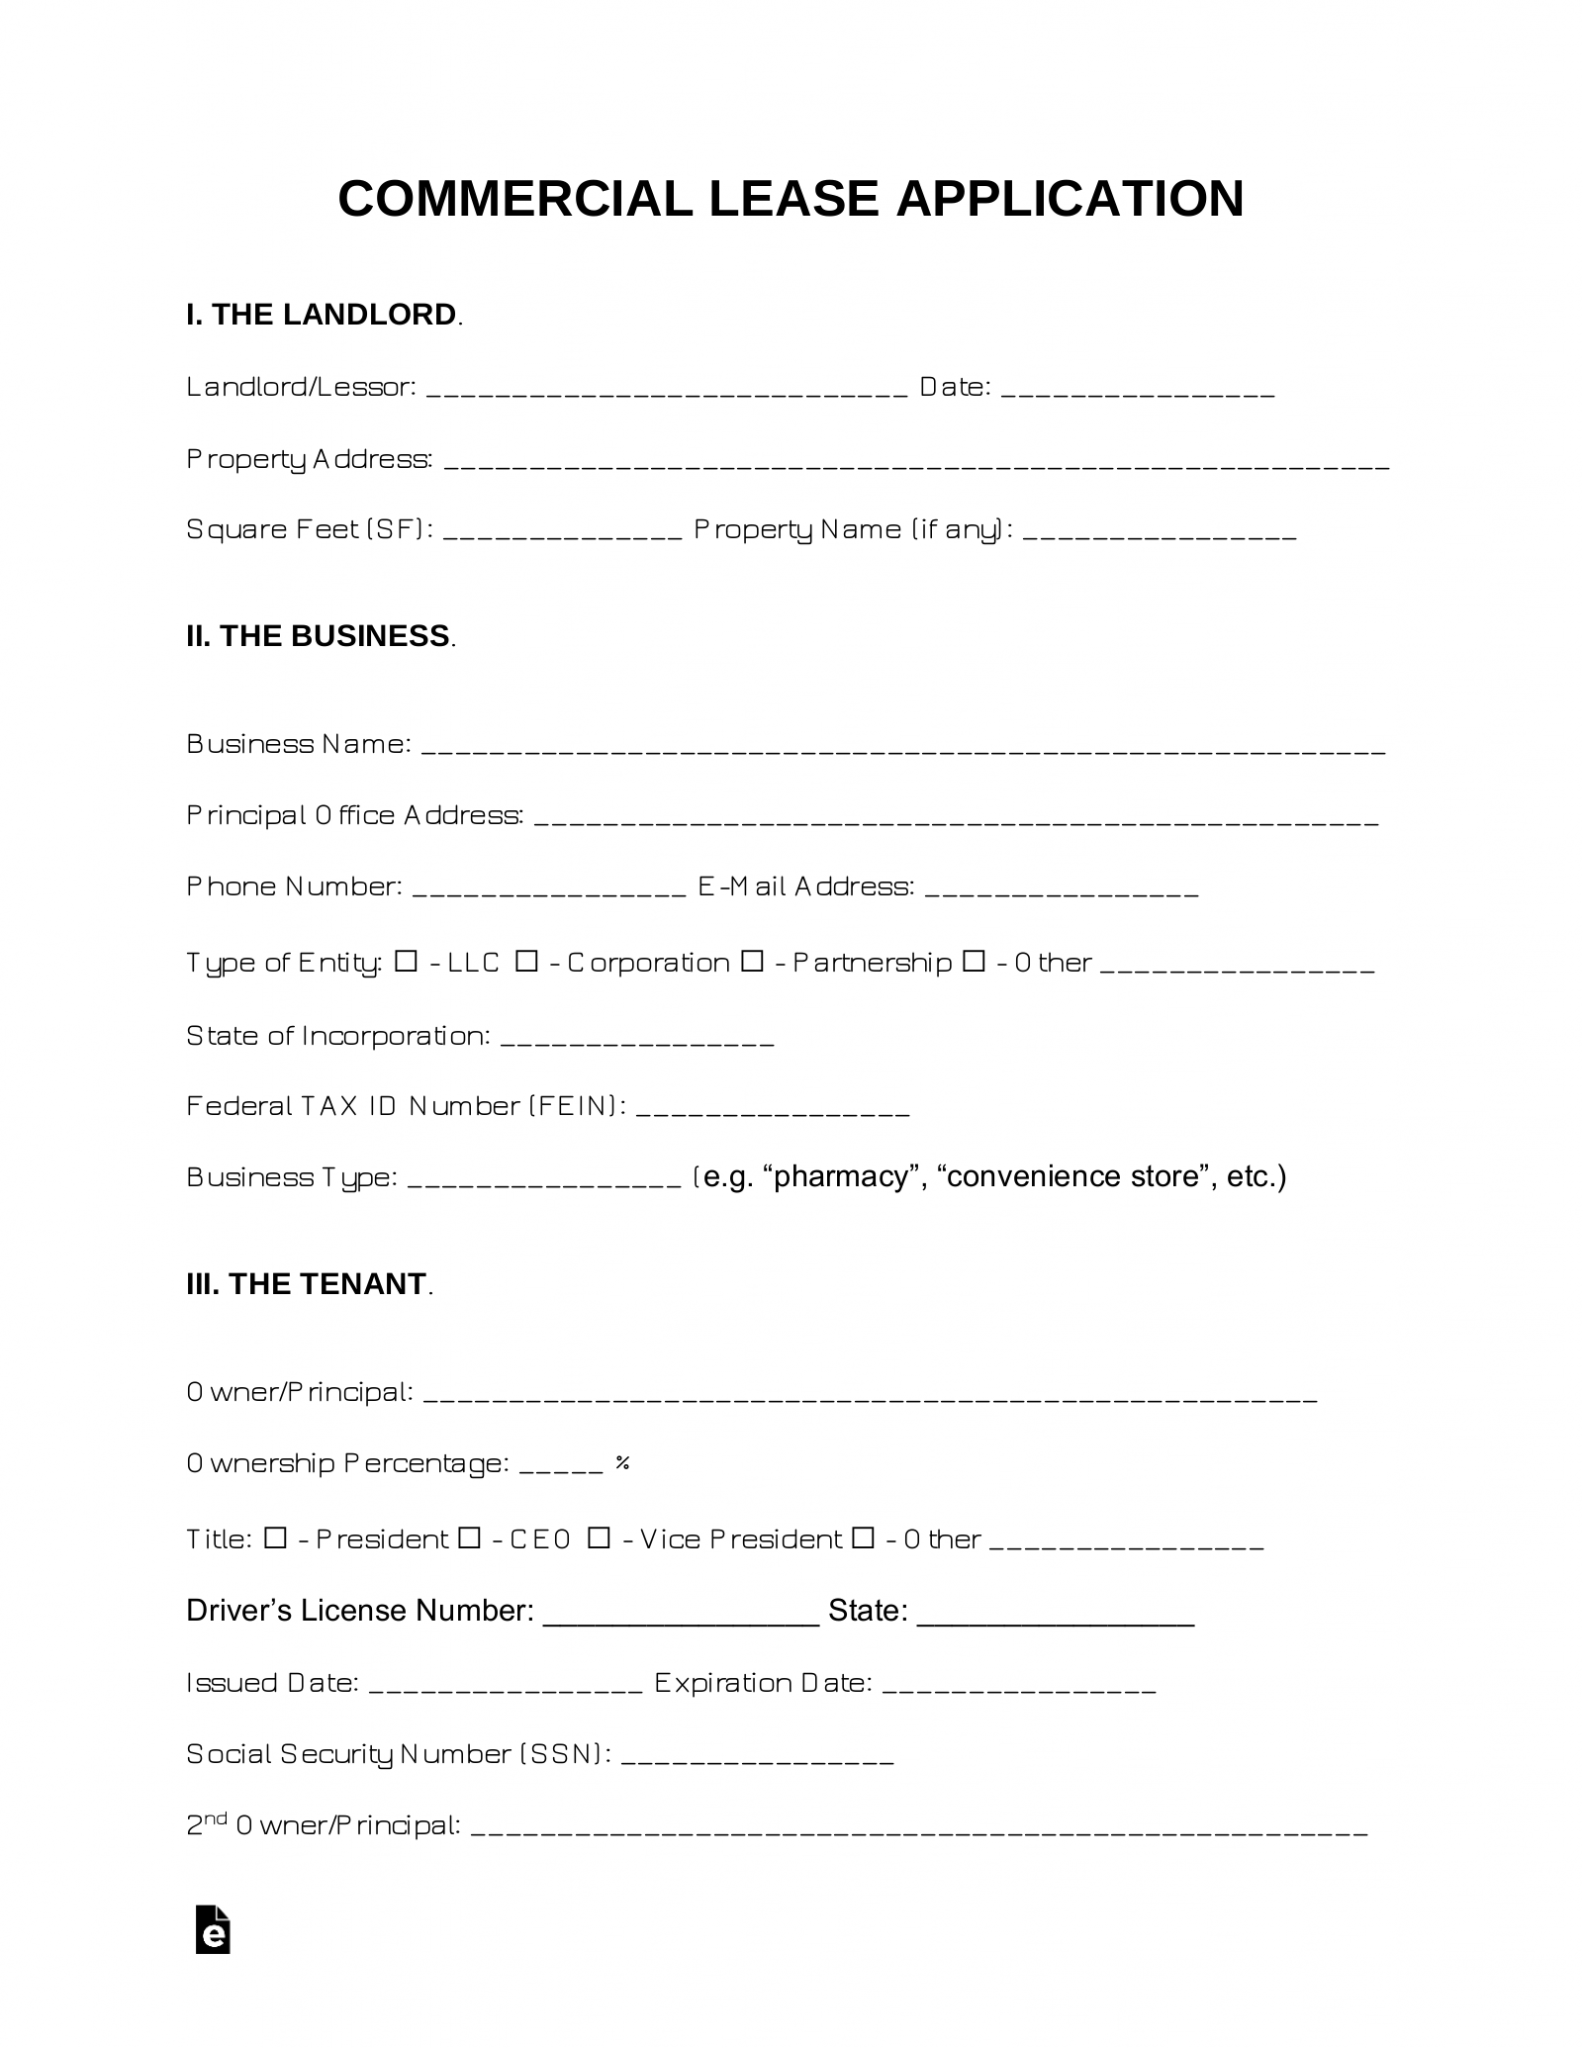 free-commercial-lease-application-form-pdf-word-eforms